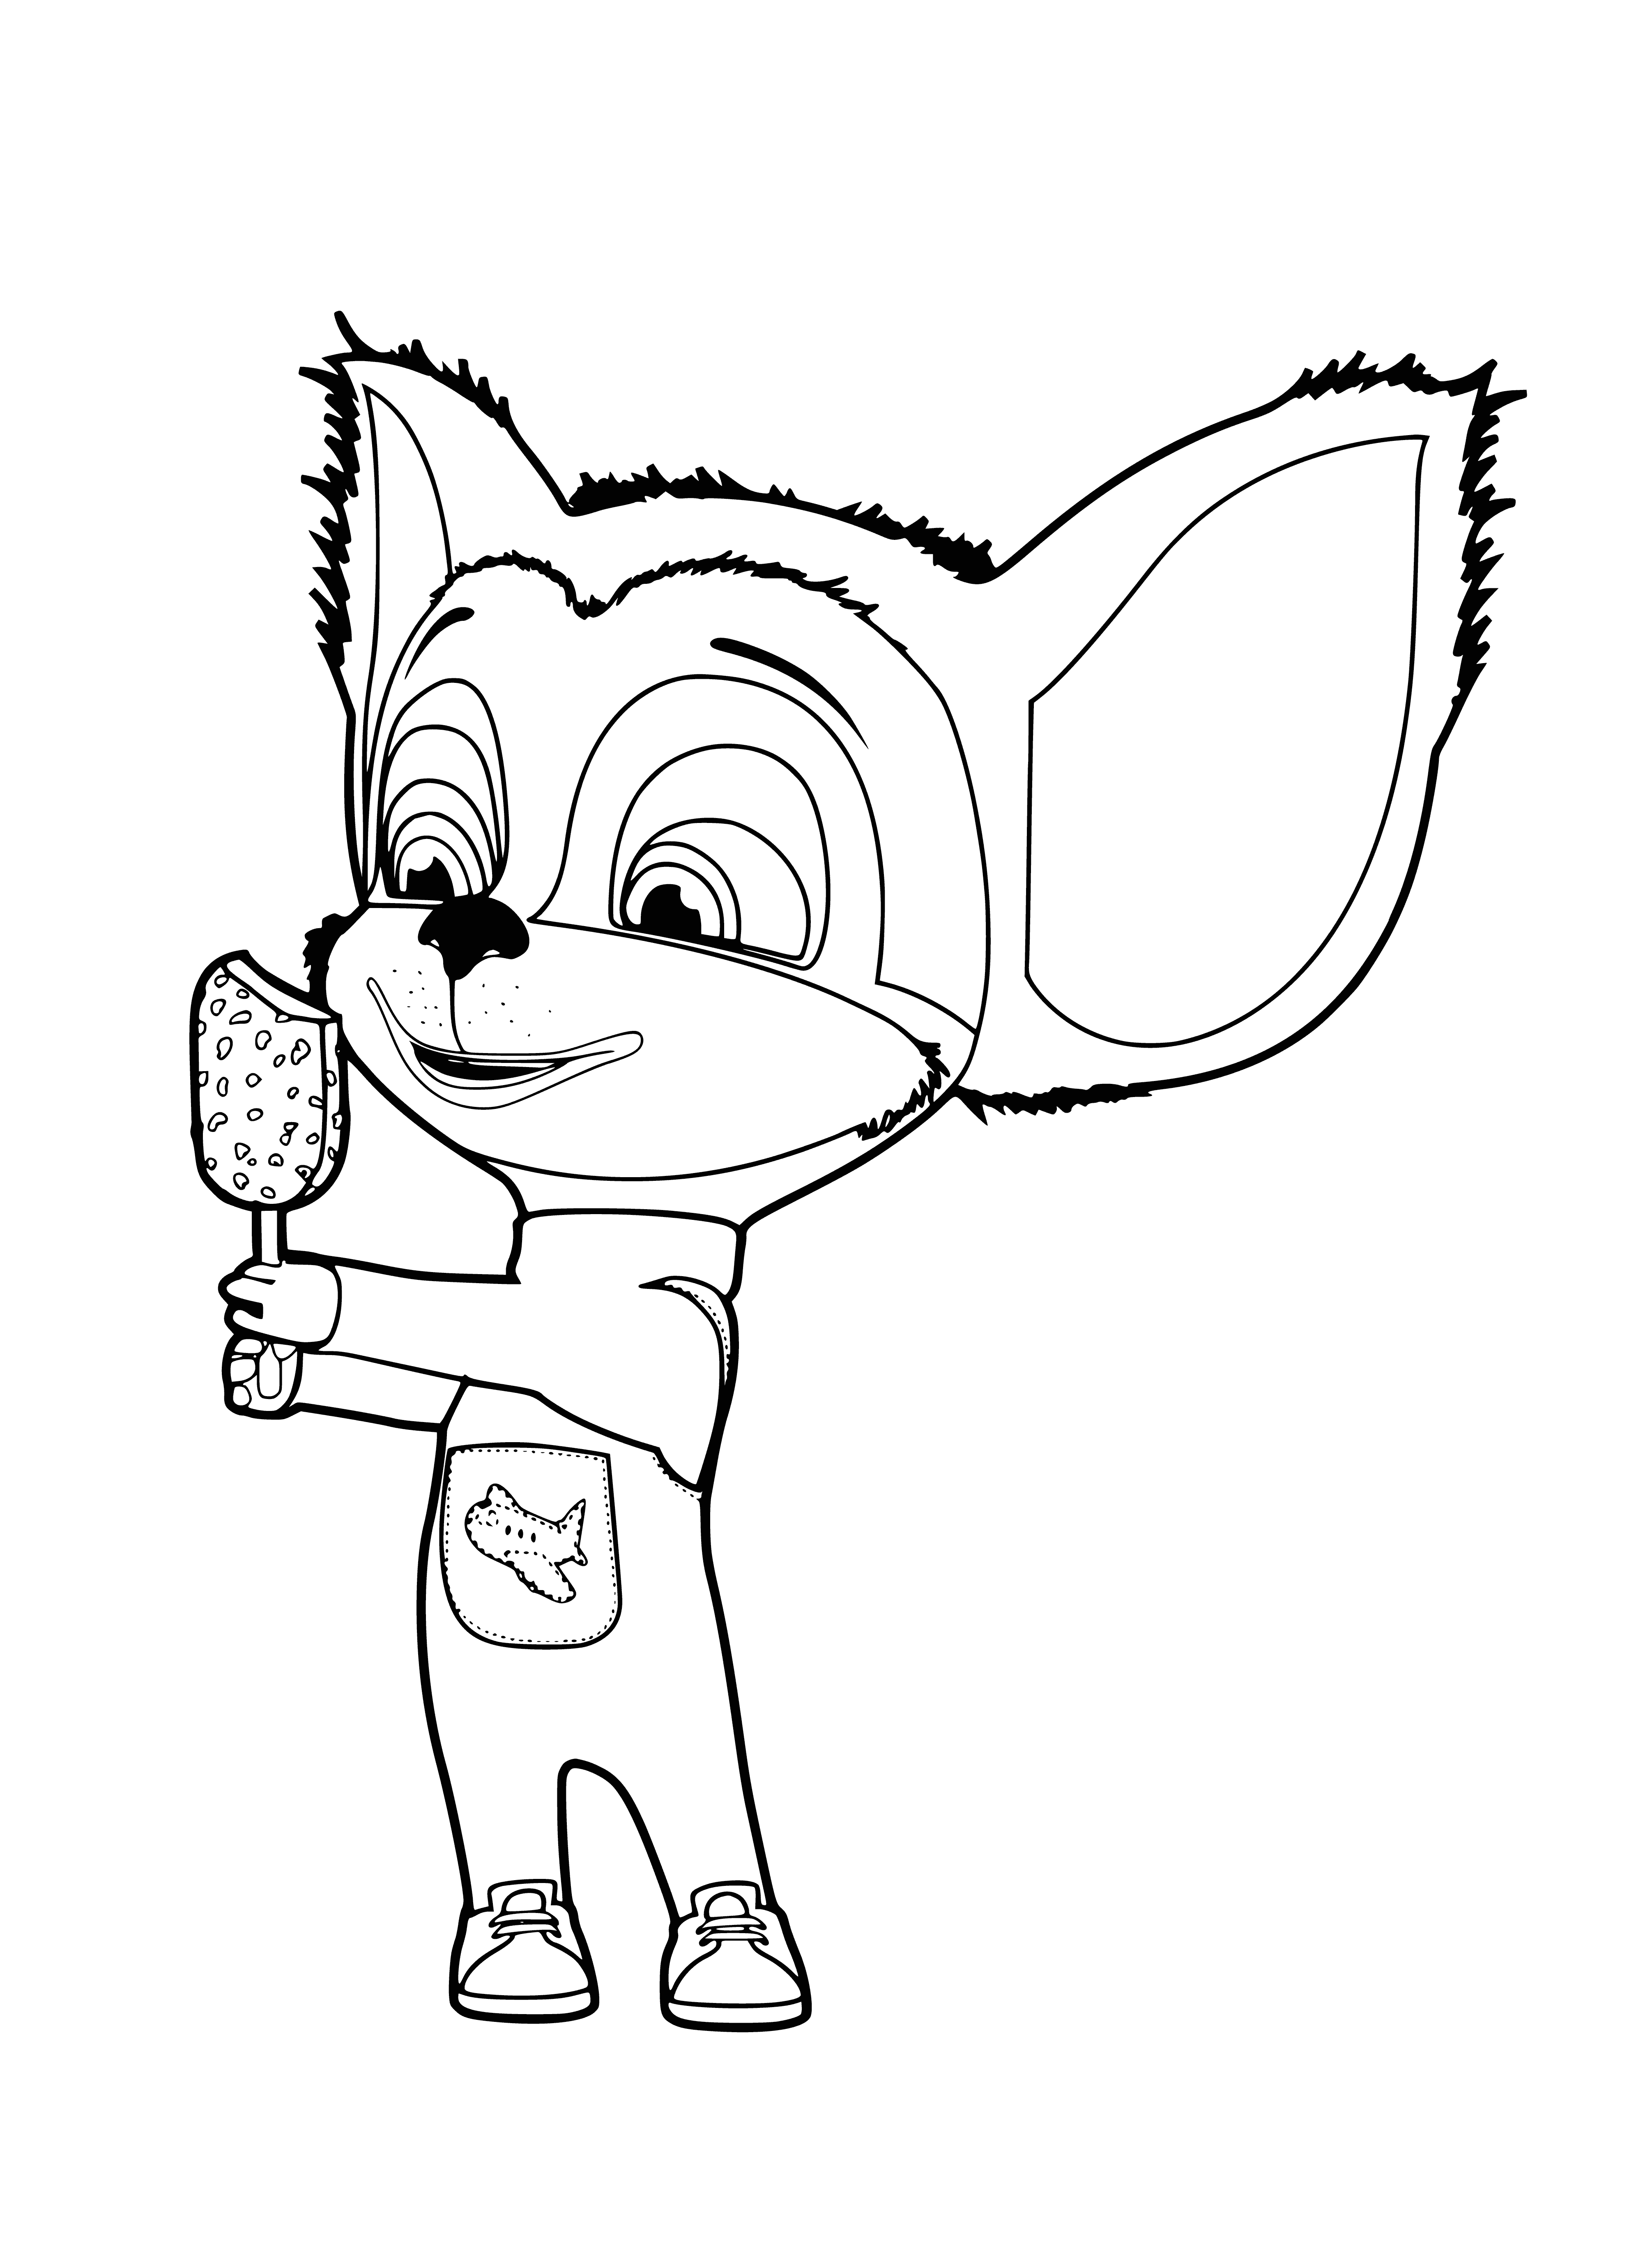 Kid eating ice cream coloring page